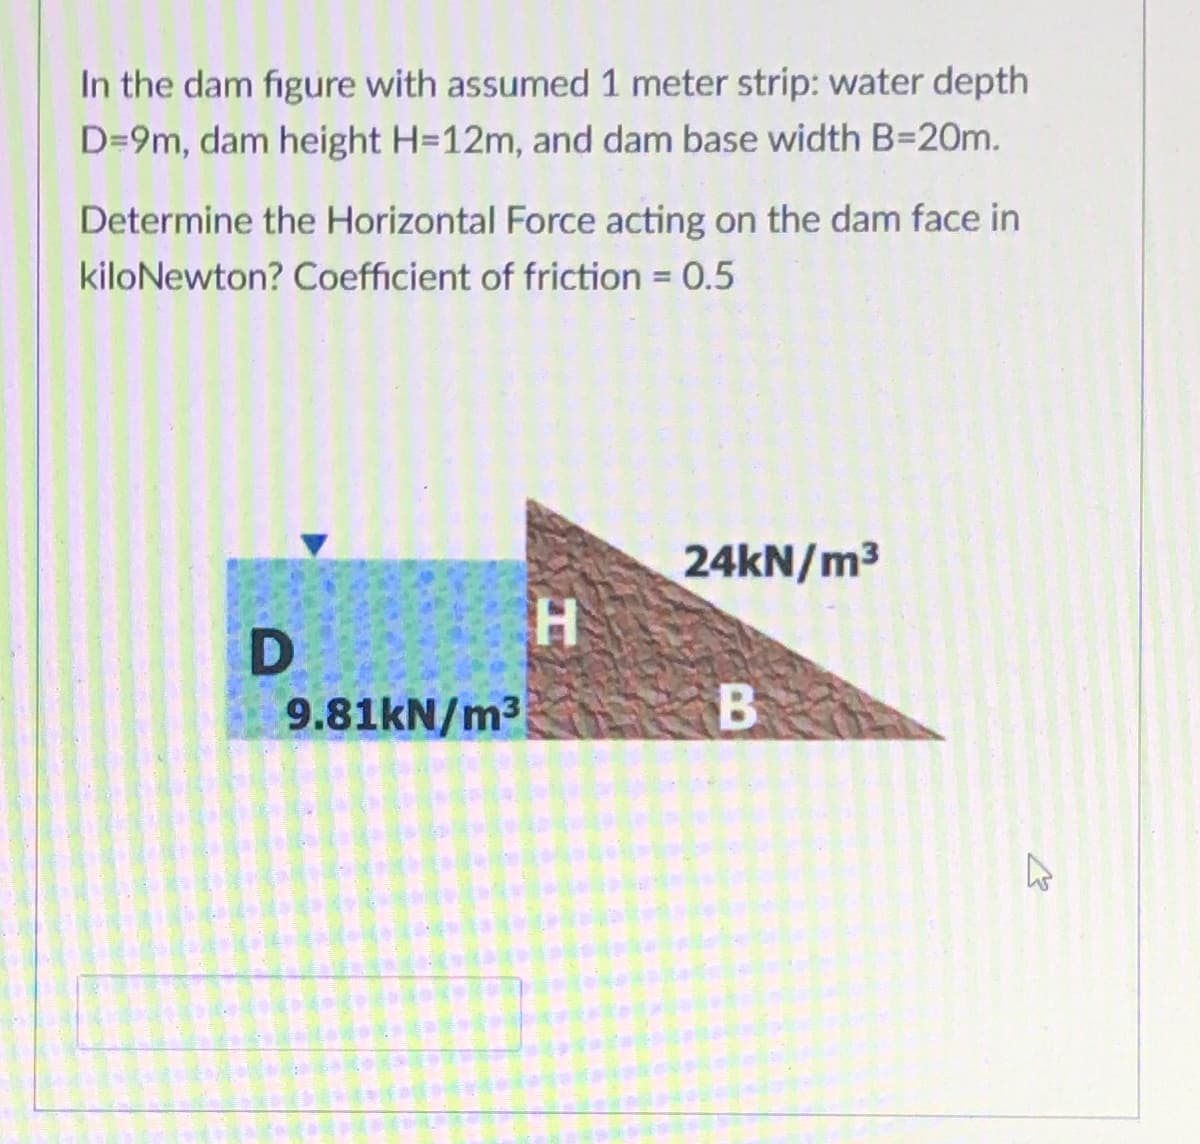 In the dam figure with assumed 1 meter strip: water depth
D=9m, dam height H=12m, and dam base width B=20m.
Determine the Horizontal Force acting on the dam face in
kiloNewton? Coefficient of friction = 0.5
24KN/m3
9.81KN/m3
